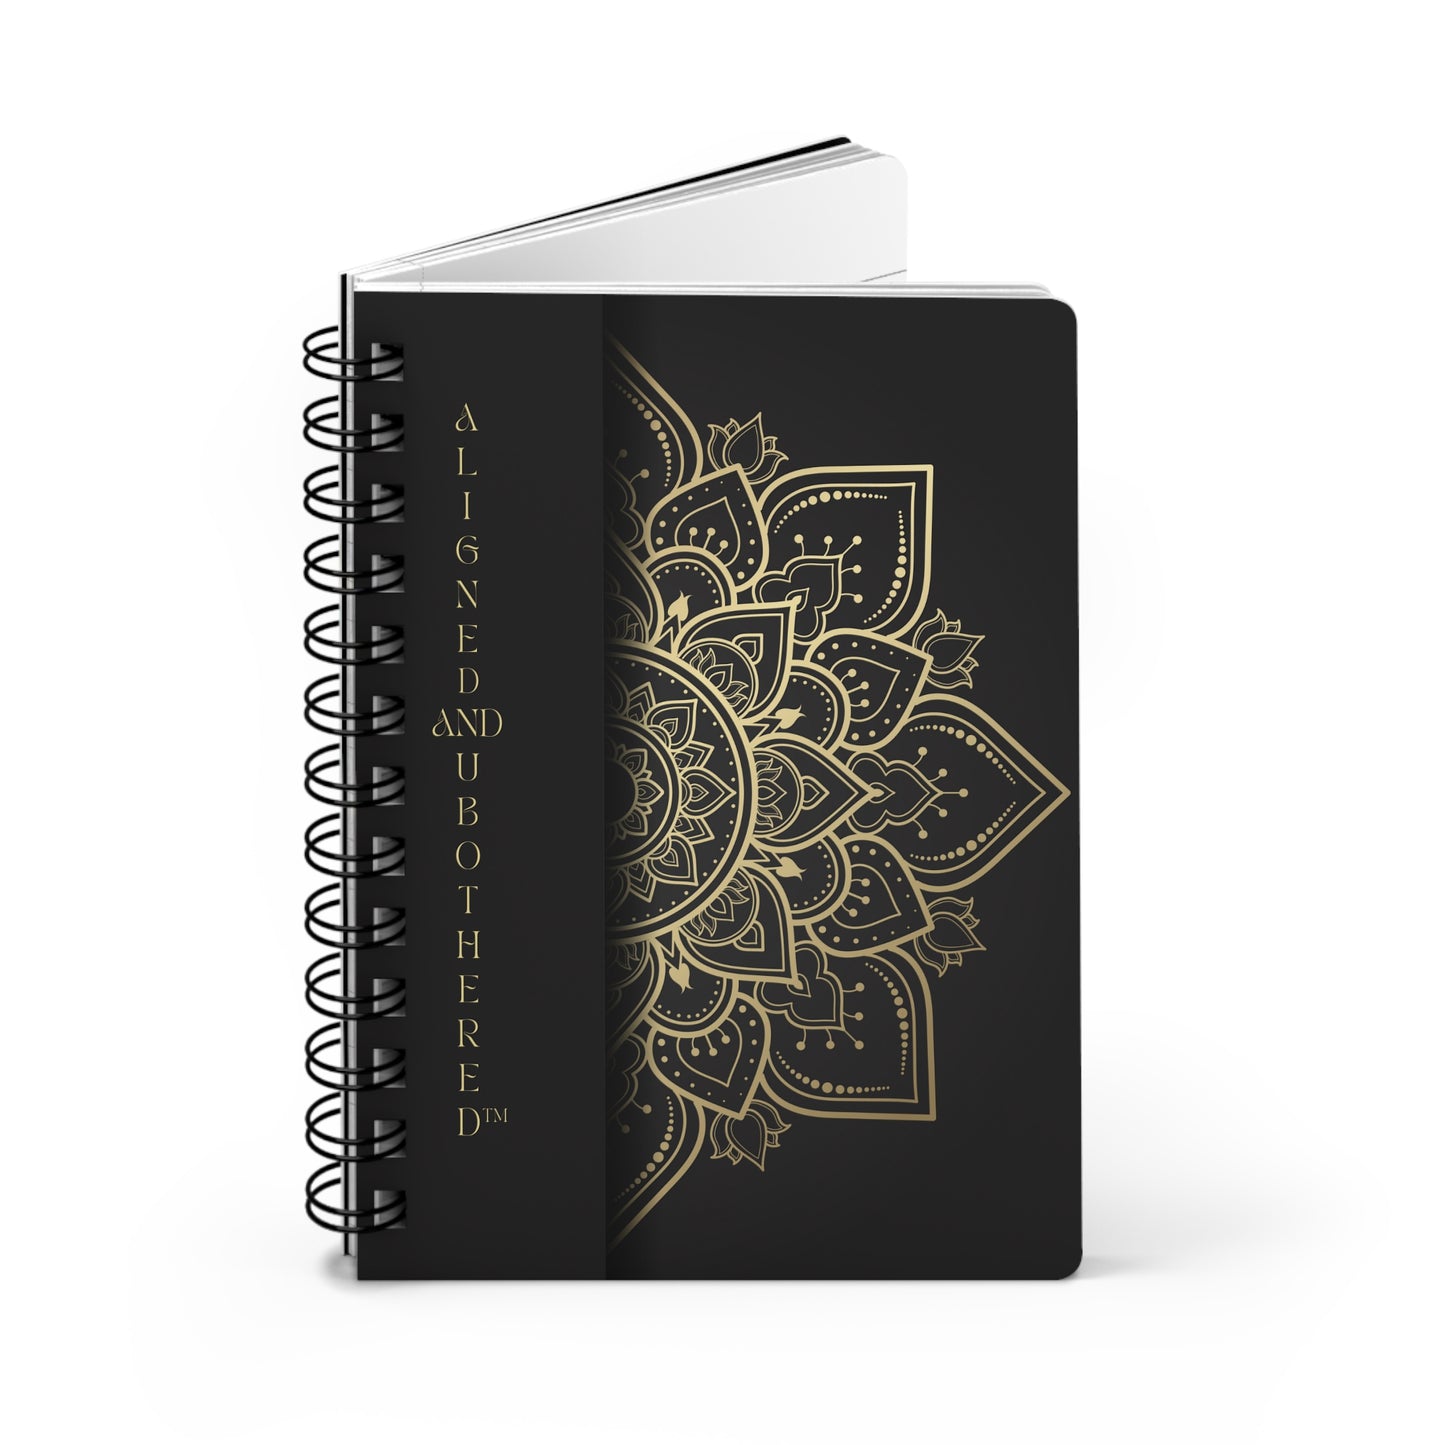 Aligned and Unbothered™ Spiral Bound Journal